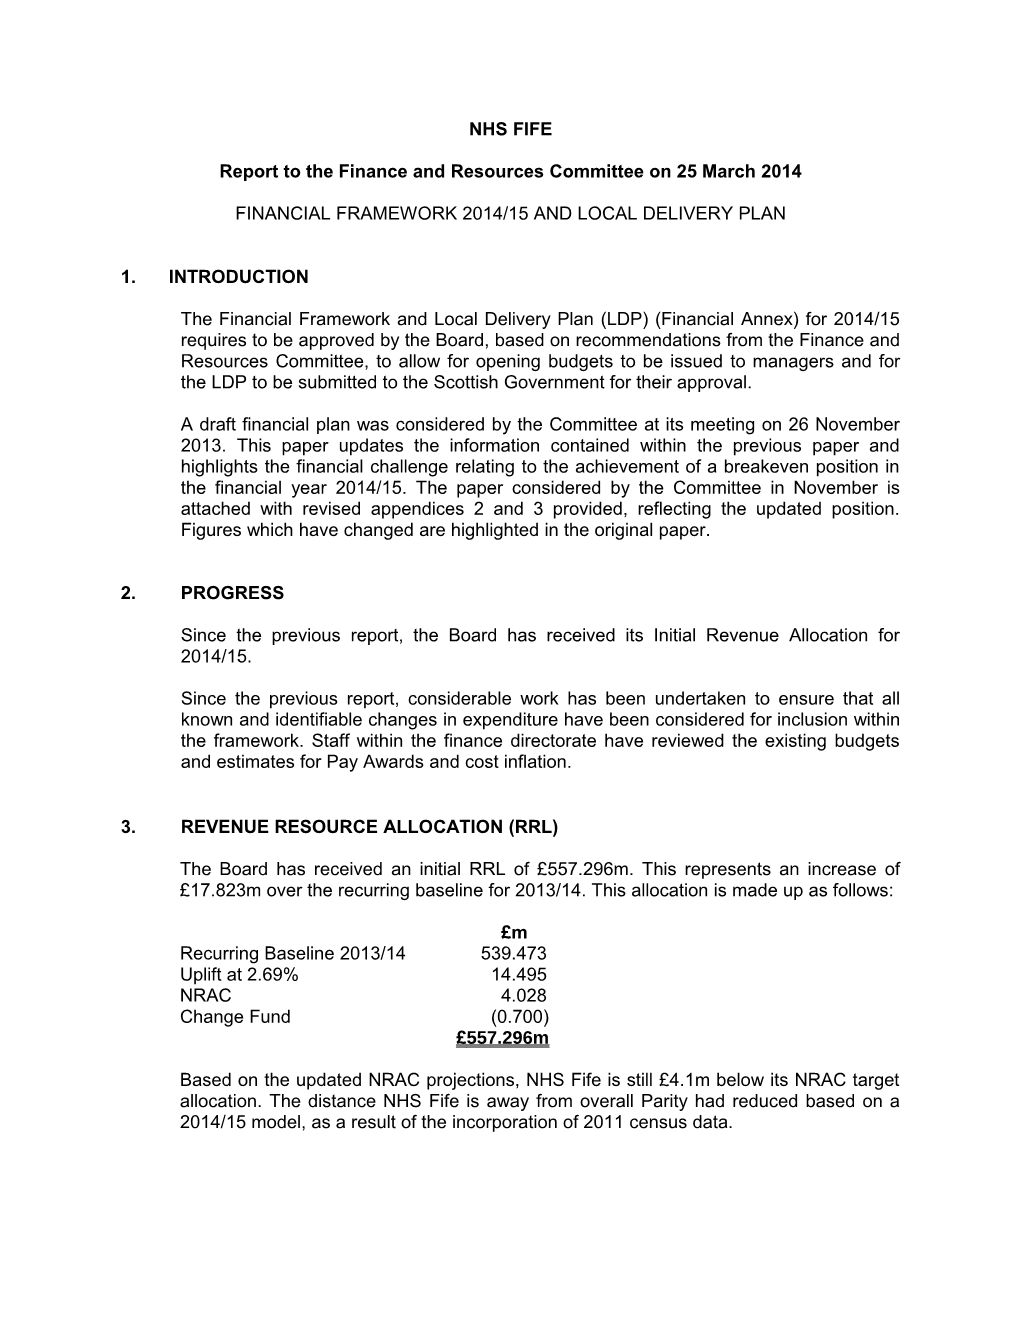 Report to the Finance and Resources Committee on 25 March 2014